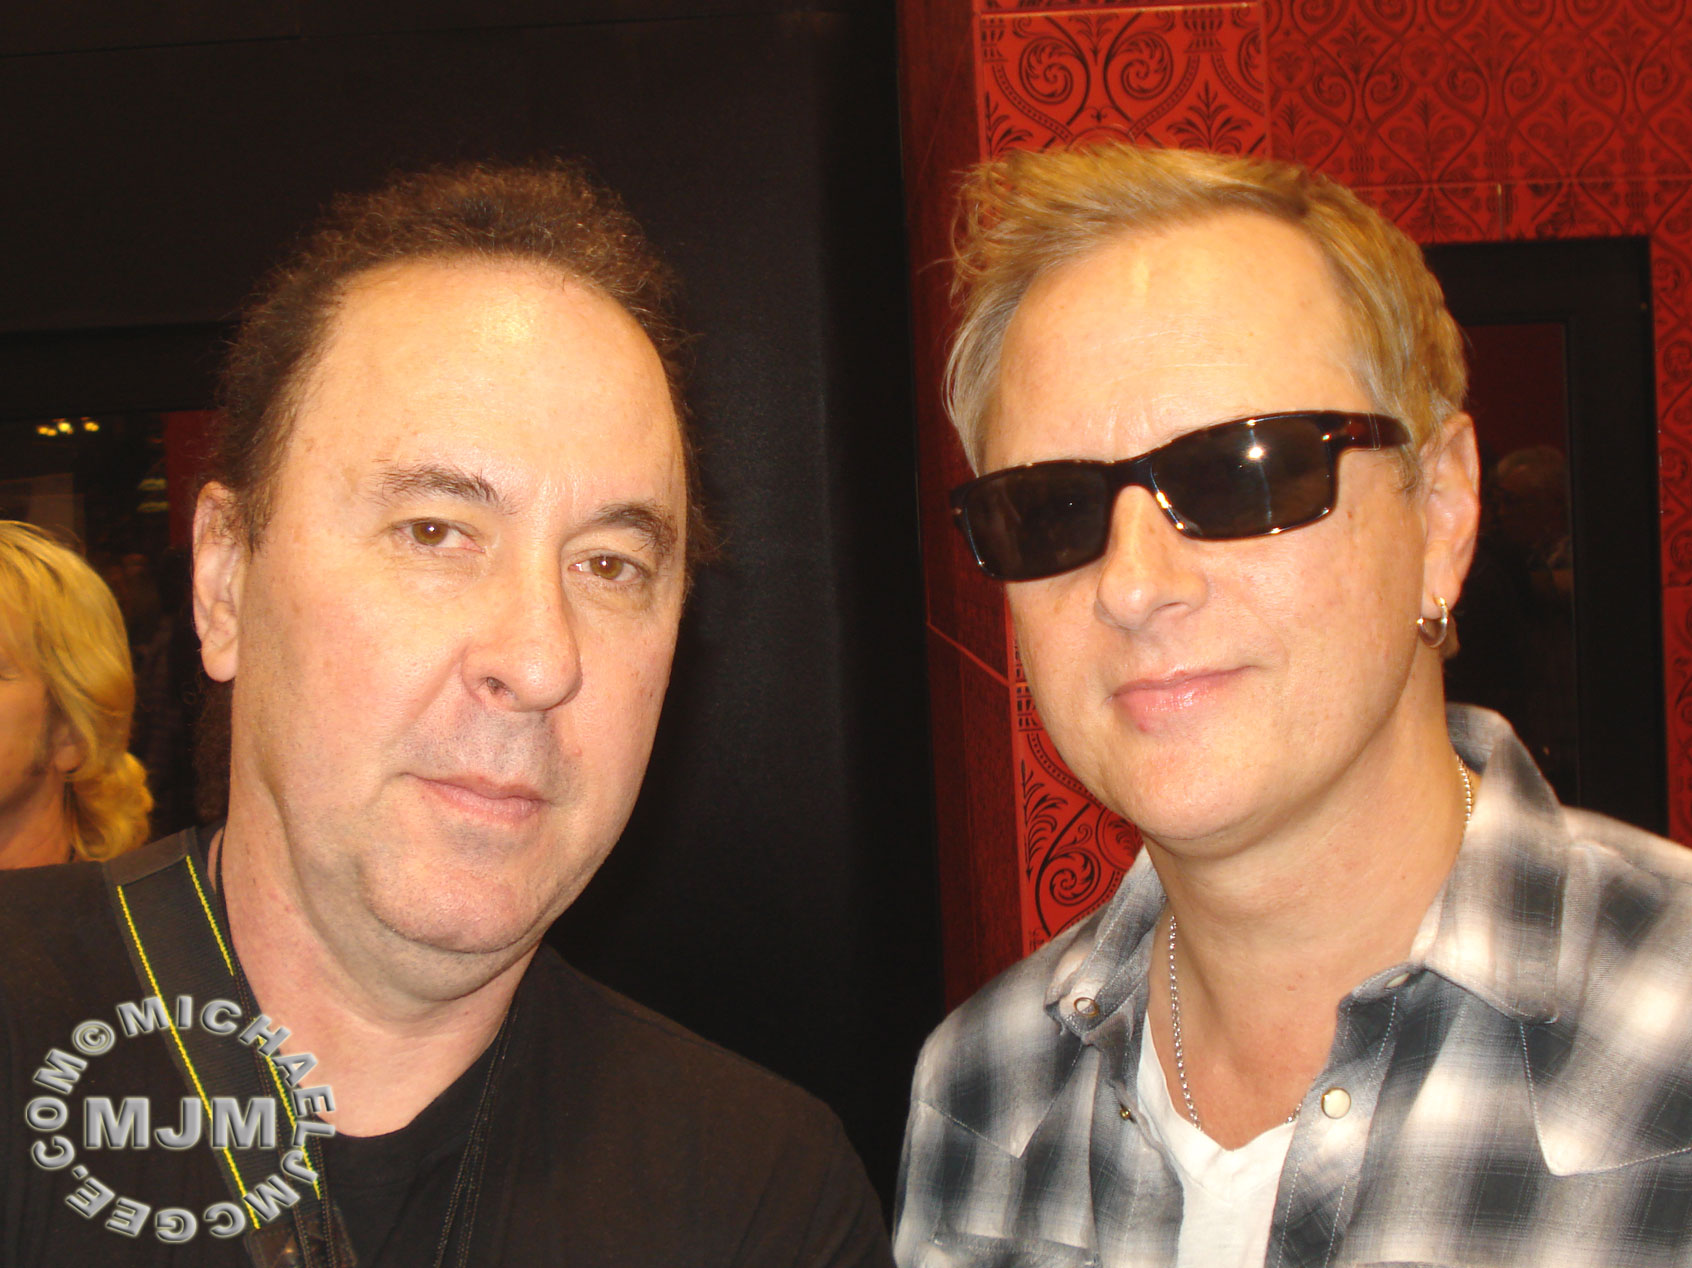 Jerry Cantrell / michaeljmcgee.com